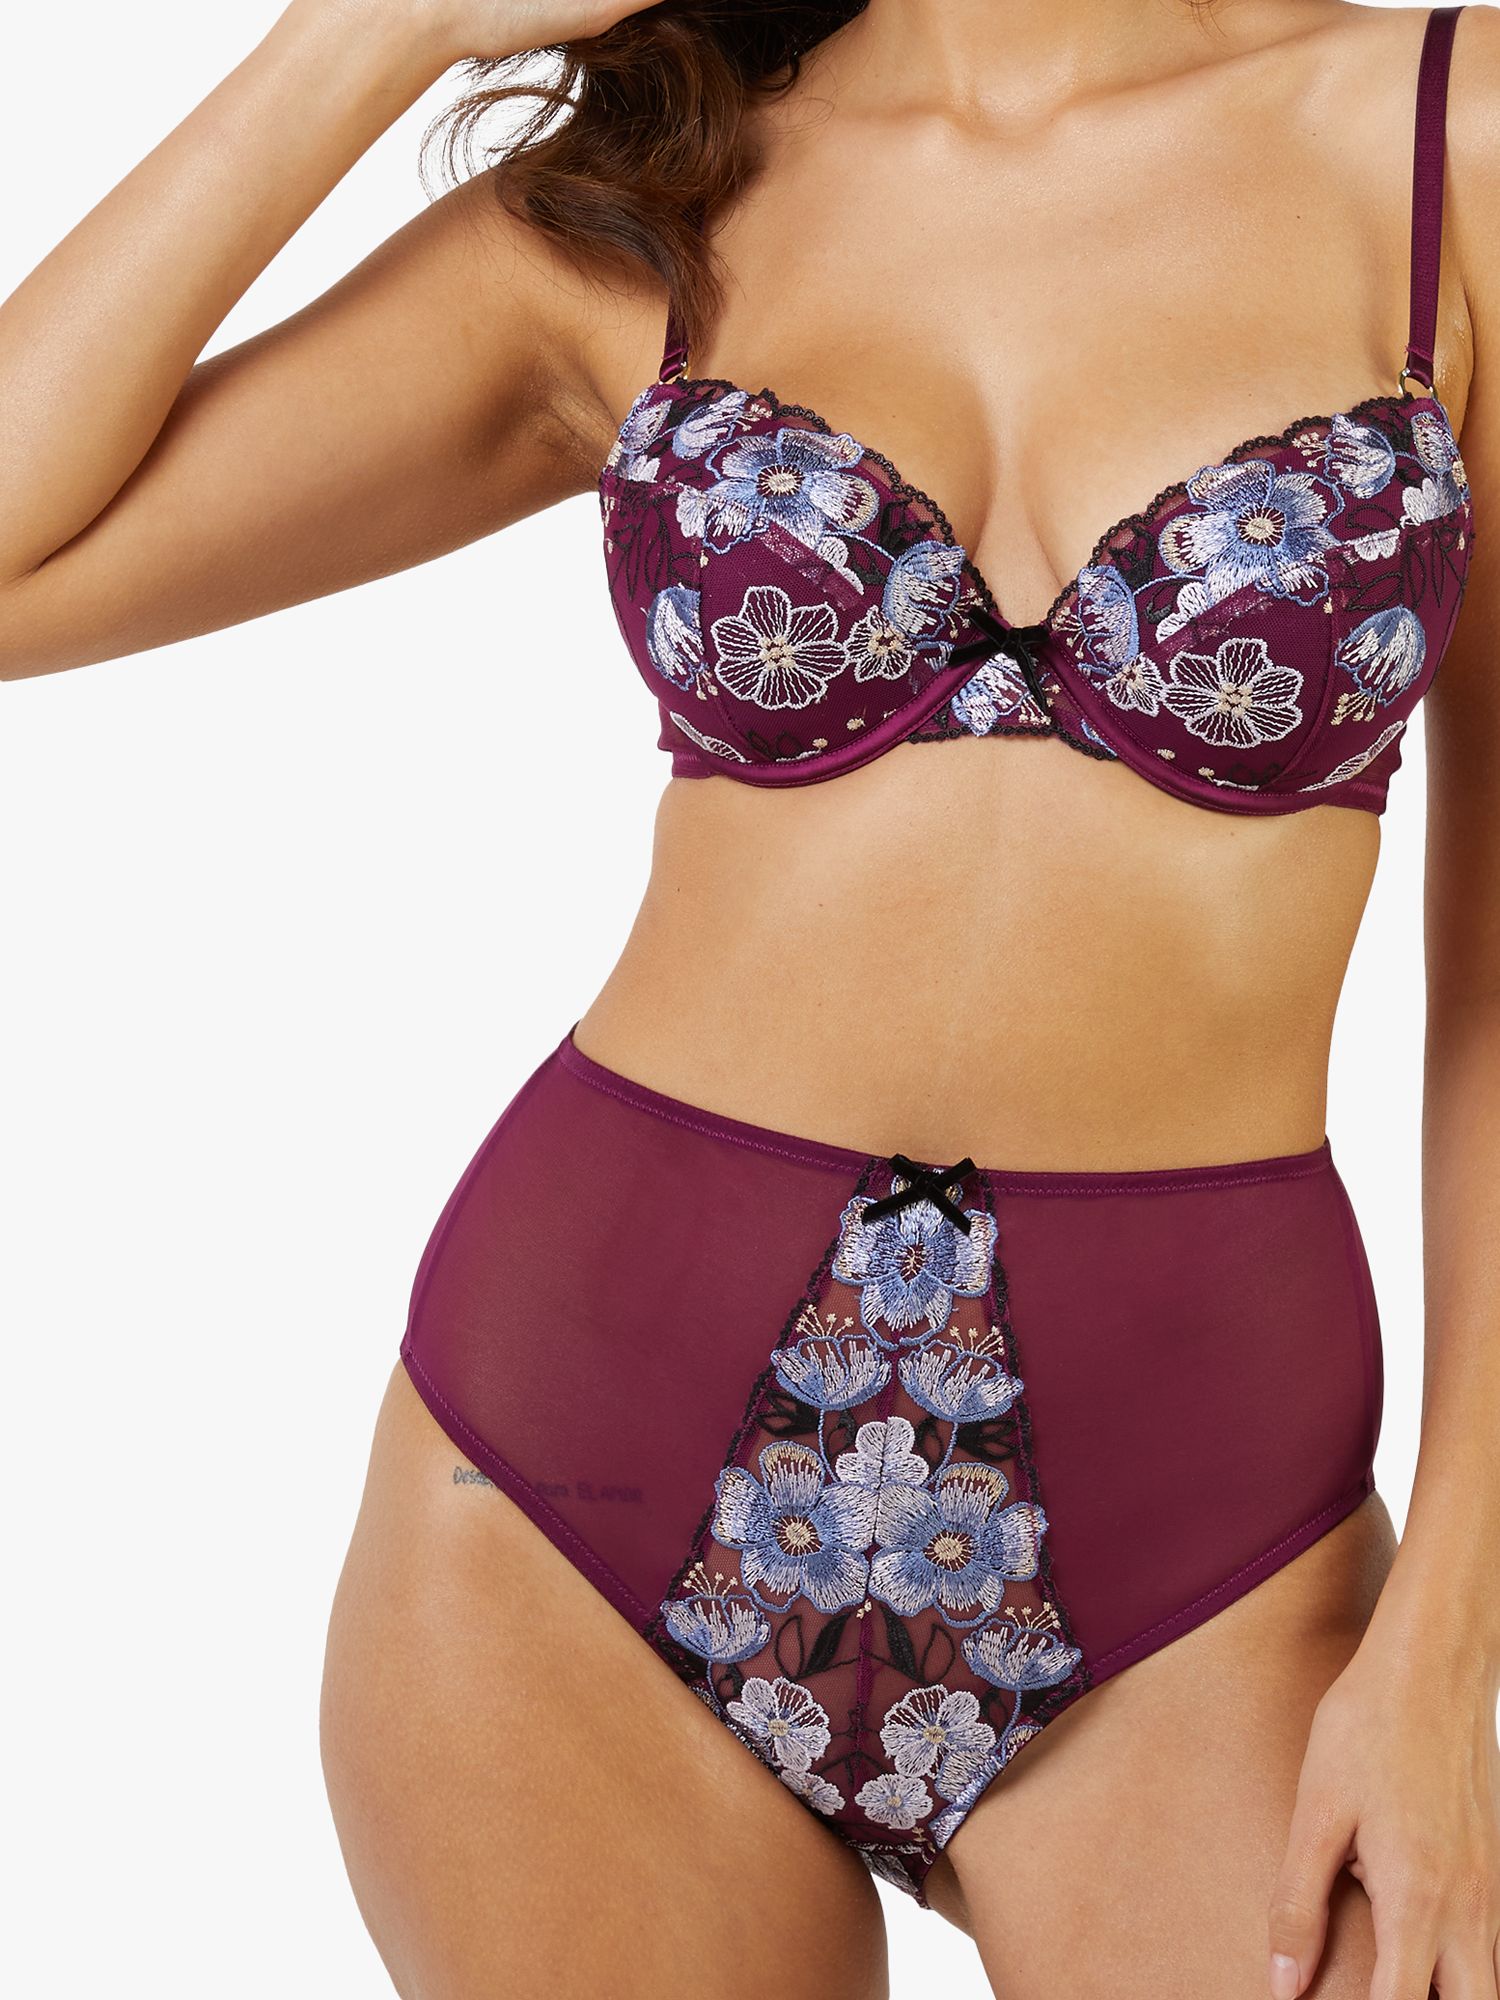 The Best Options When Shopping For A Big Bra Size – Playful Promises